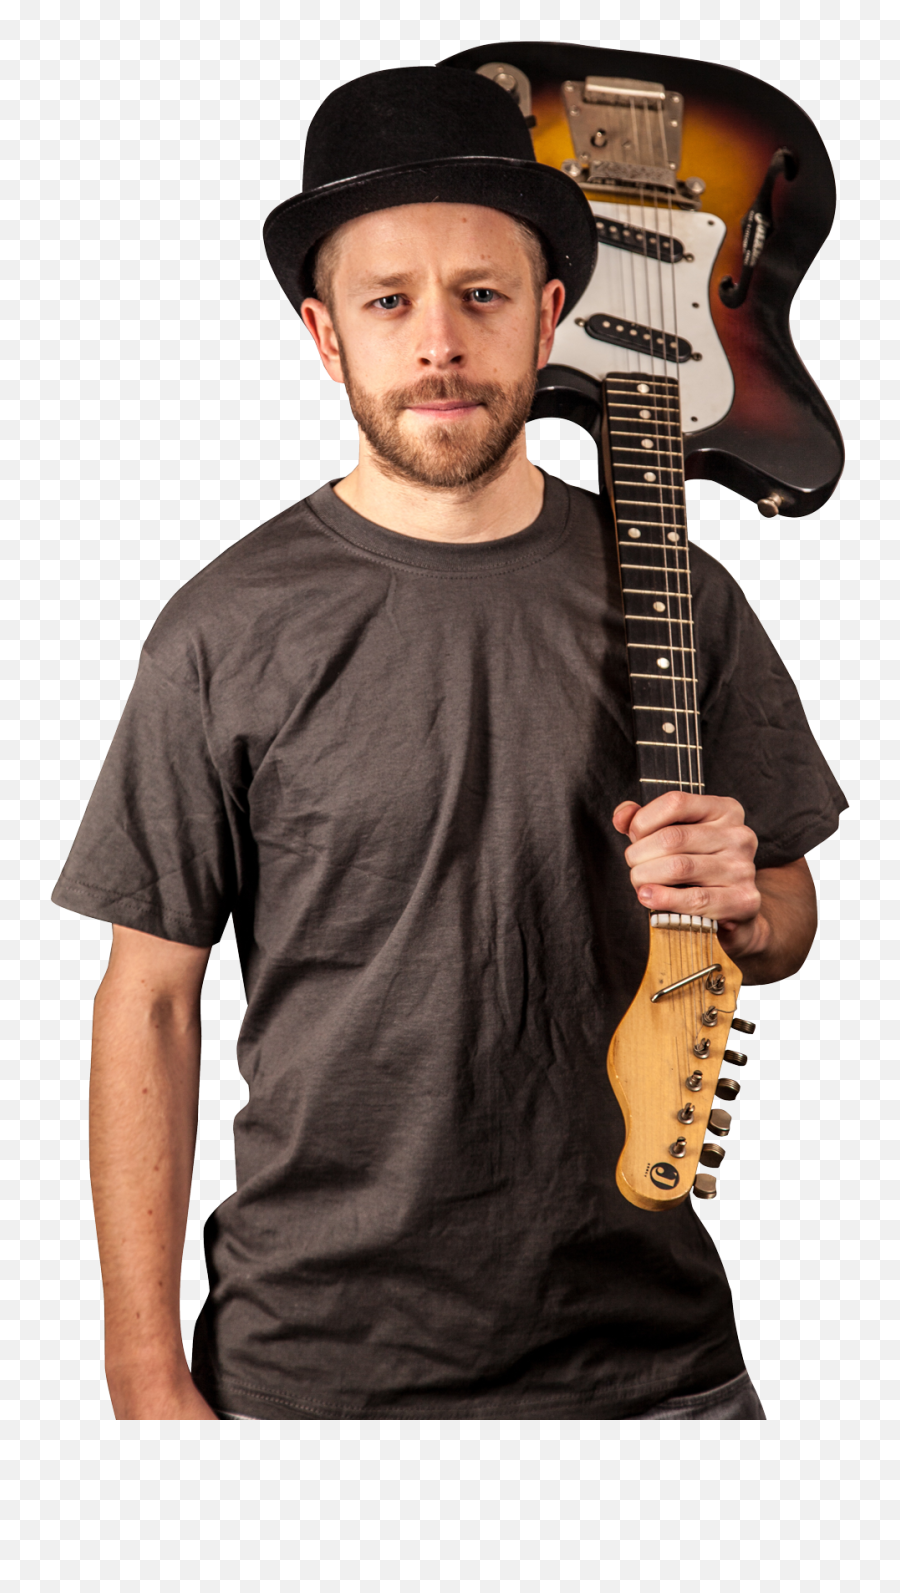 Stand And Holds A Guitar Png Image - Music Magazine Cover Design,Guitar Png